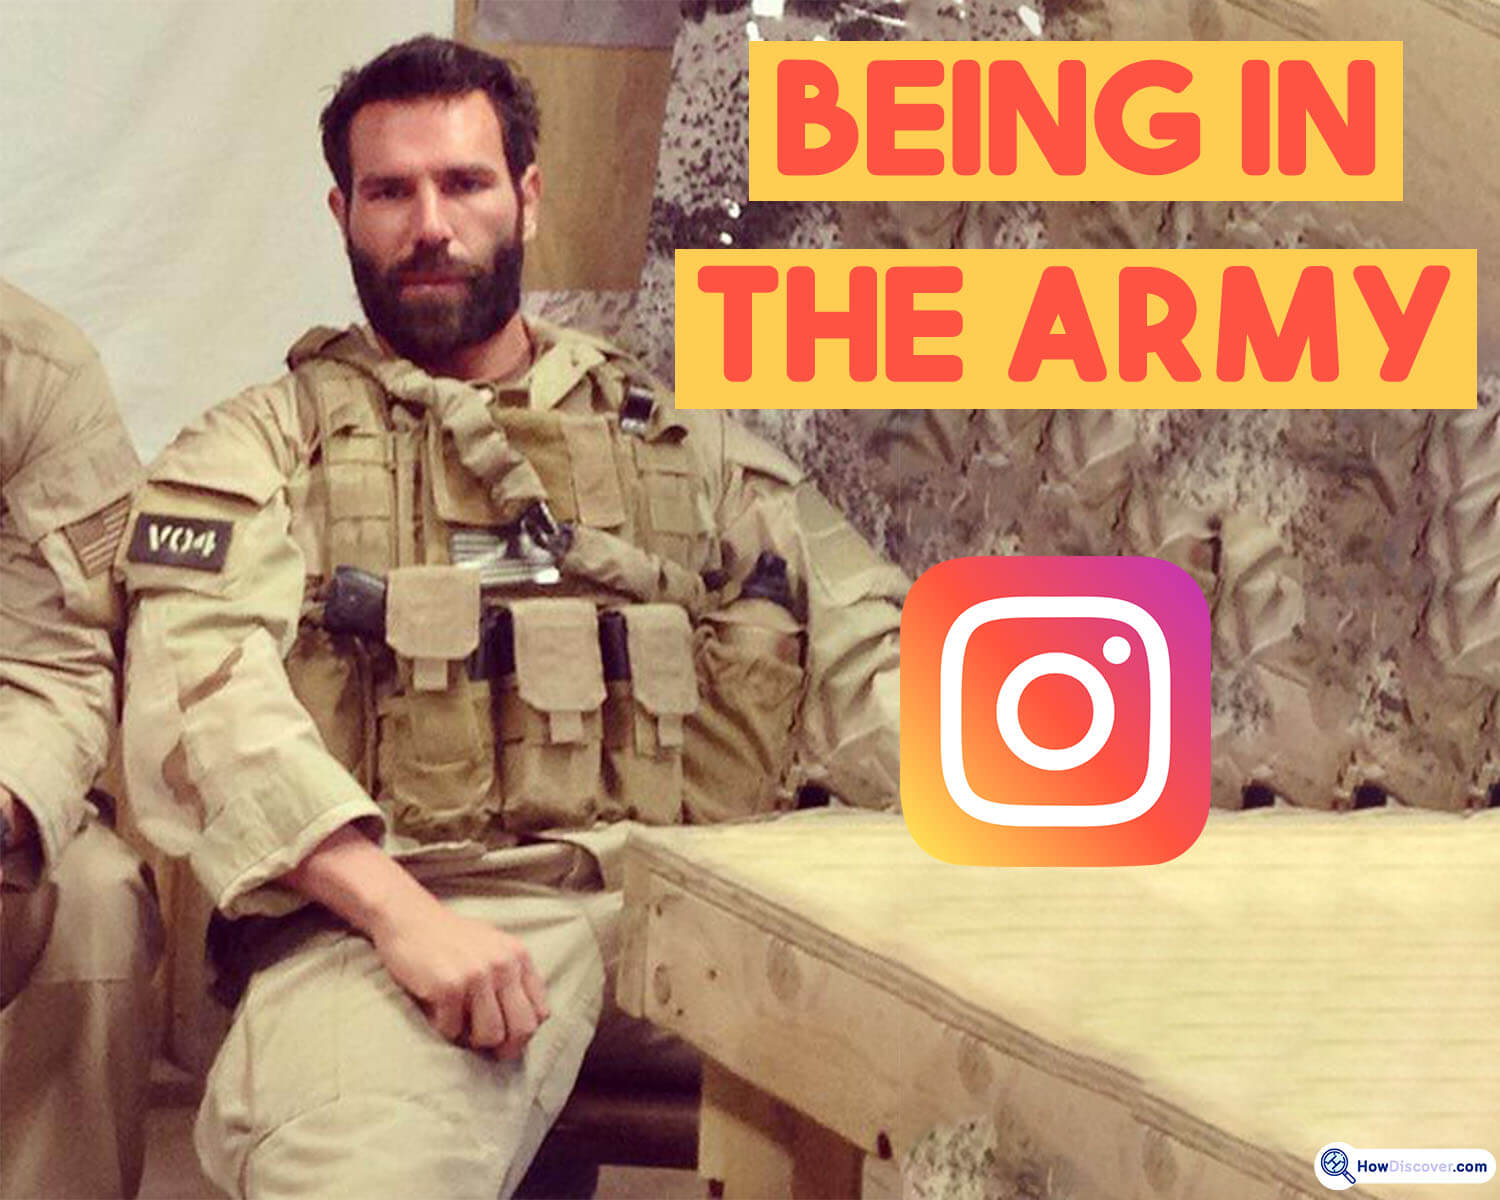 Being in the army - Who Is The King Of Instagram